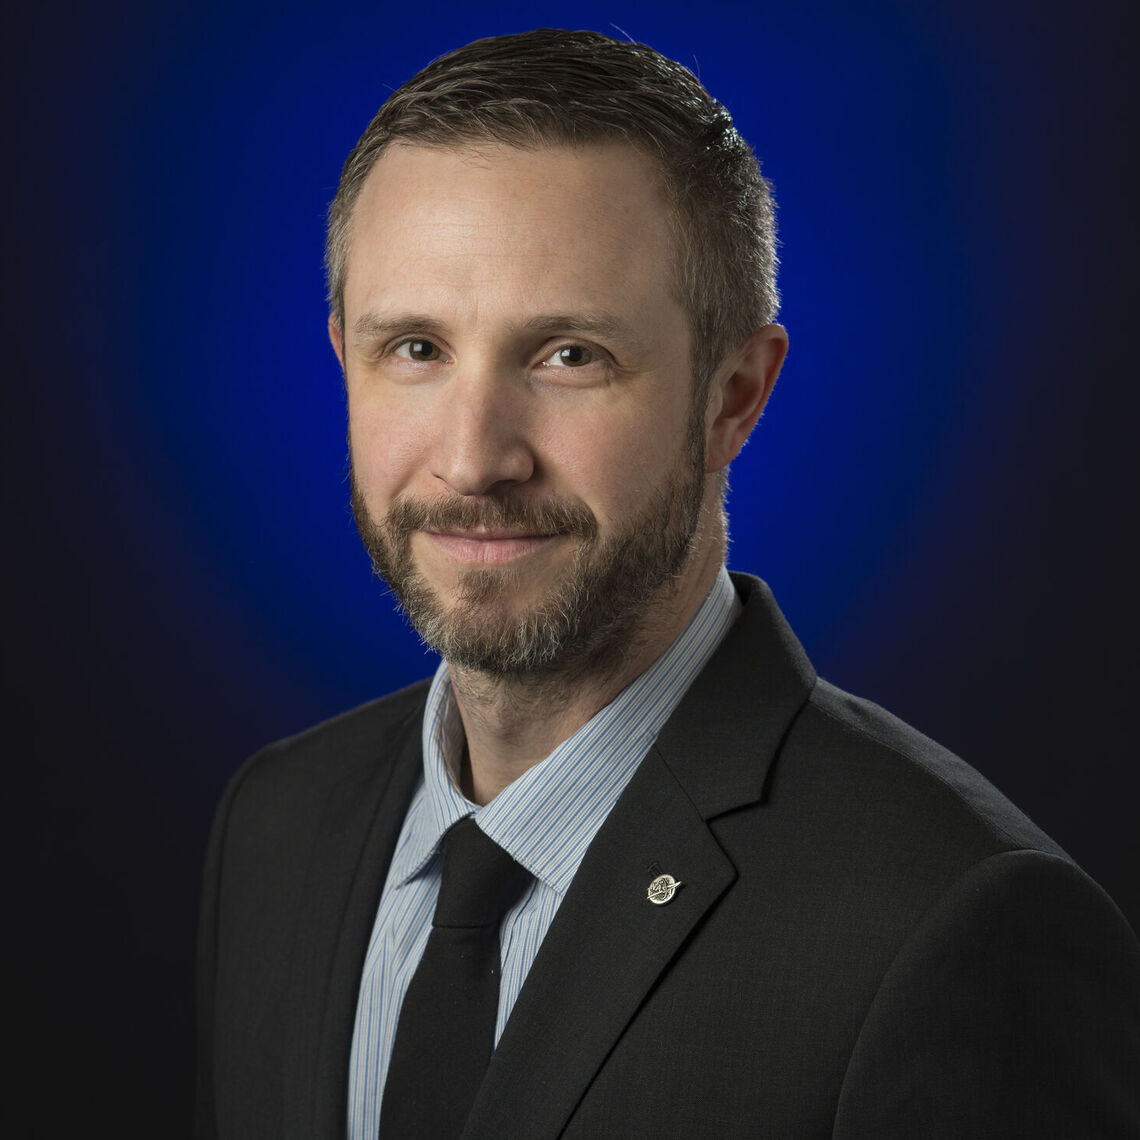 Jacob Bleacher '00 will be the featured speaker at Franklin & Marshall's 236th Commencement May 13. Bleacher is the chief exploration scientist in NASA's Exploration Systems Development Mission Directorate.